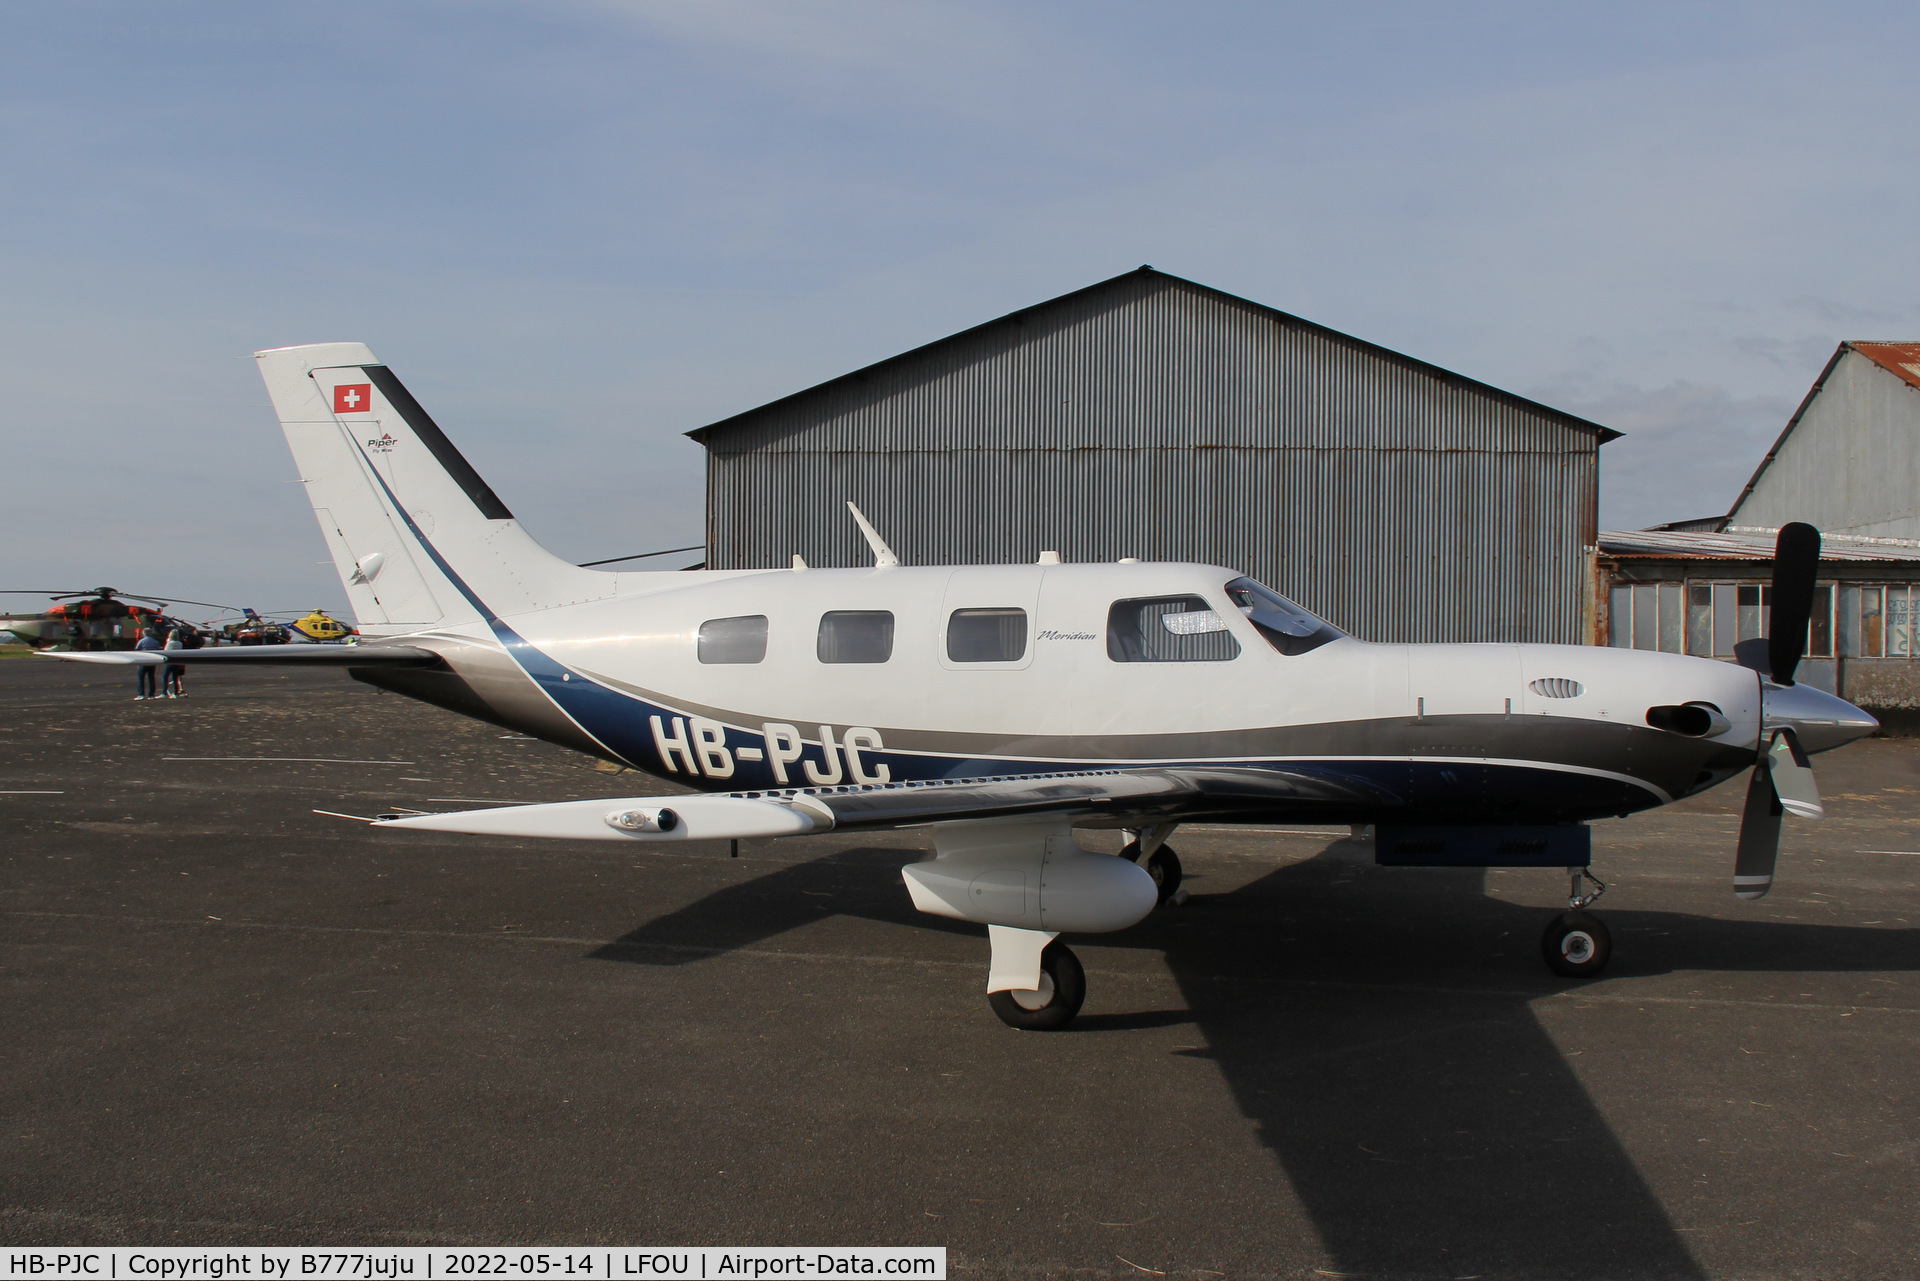 HB-PJC, 2007 Piper PA-46-500T C/N 46-97373, at Helico 2022 Cholet